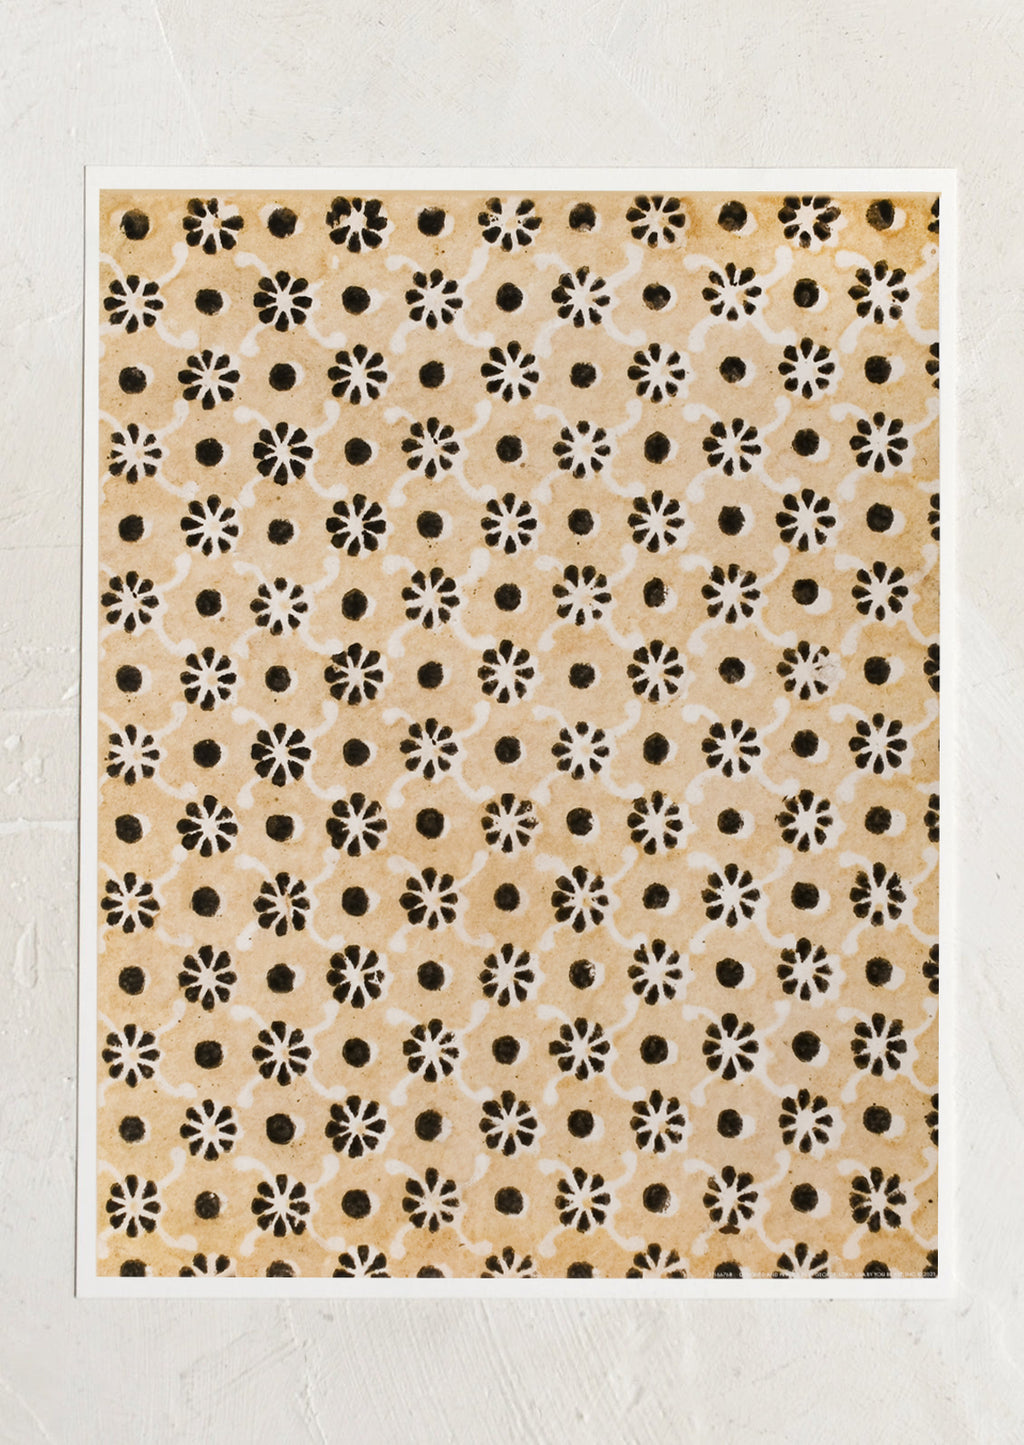 1: An art print that looks like a block printed textile in beige and black flower pattern.